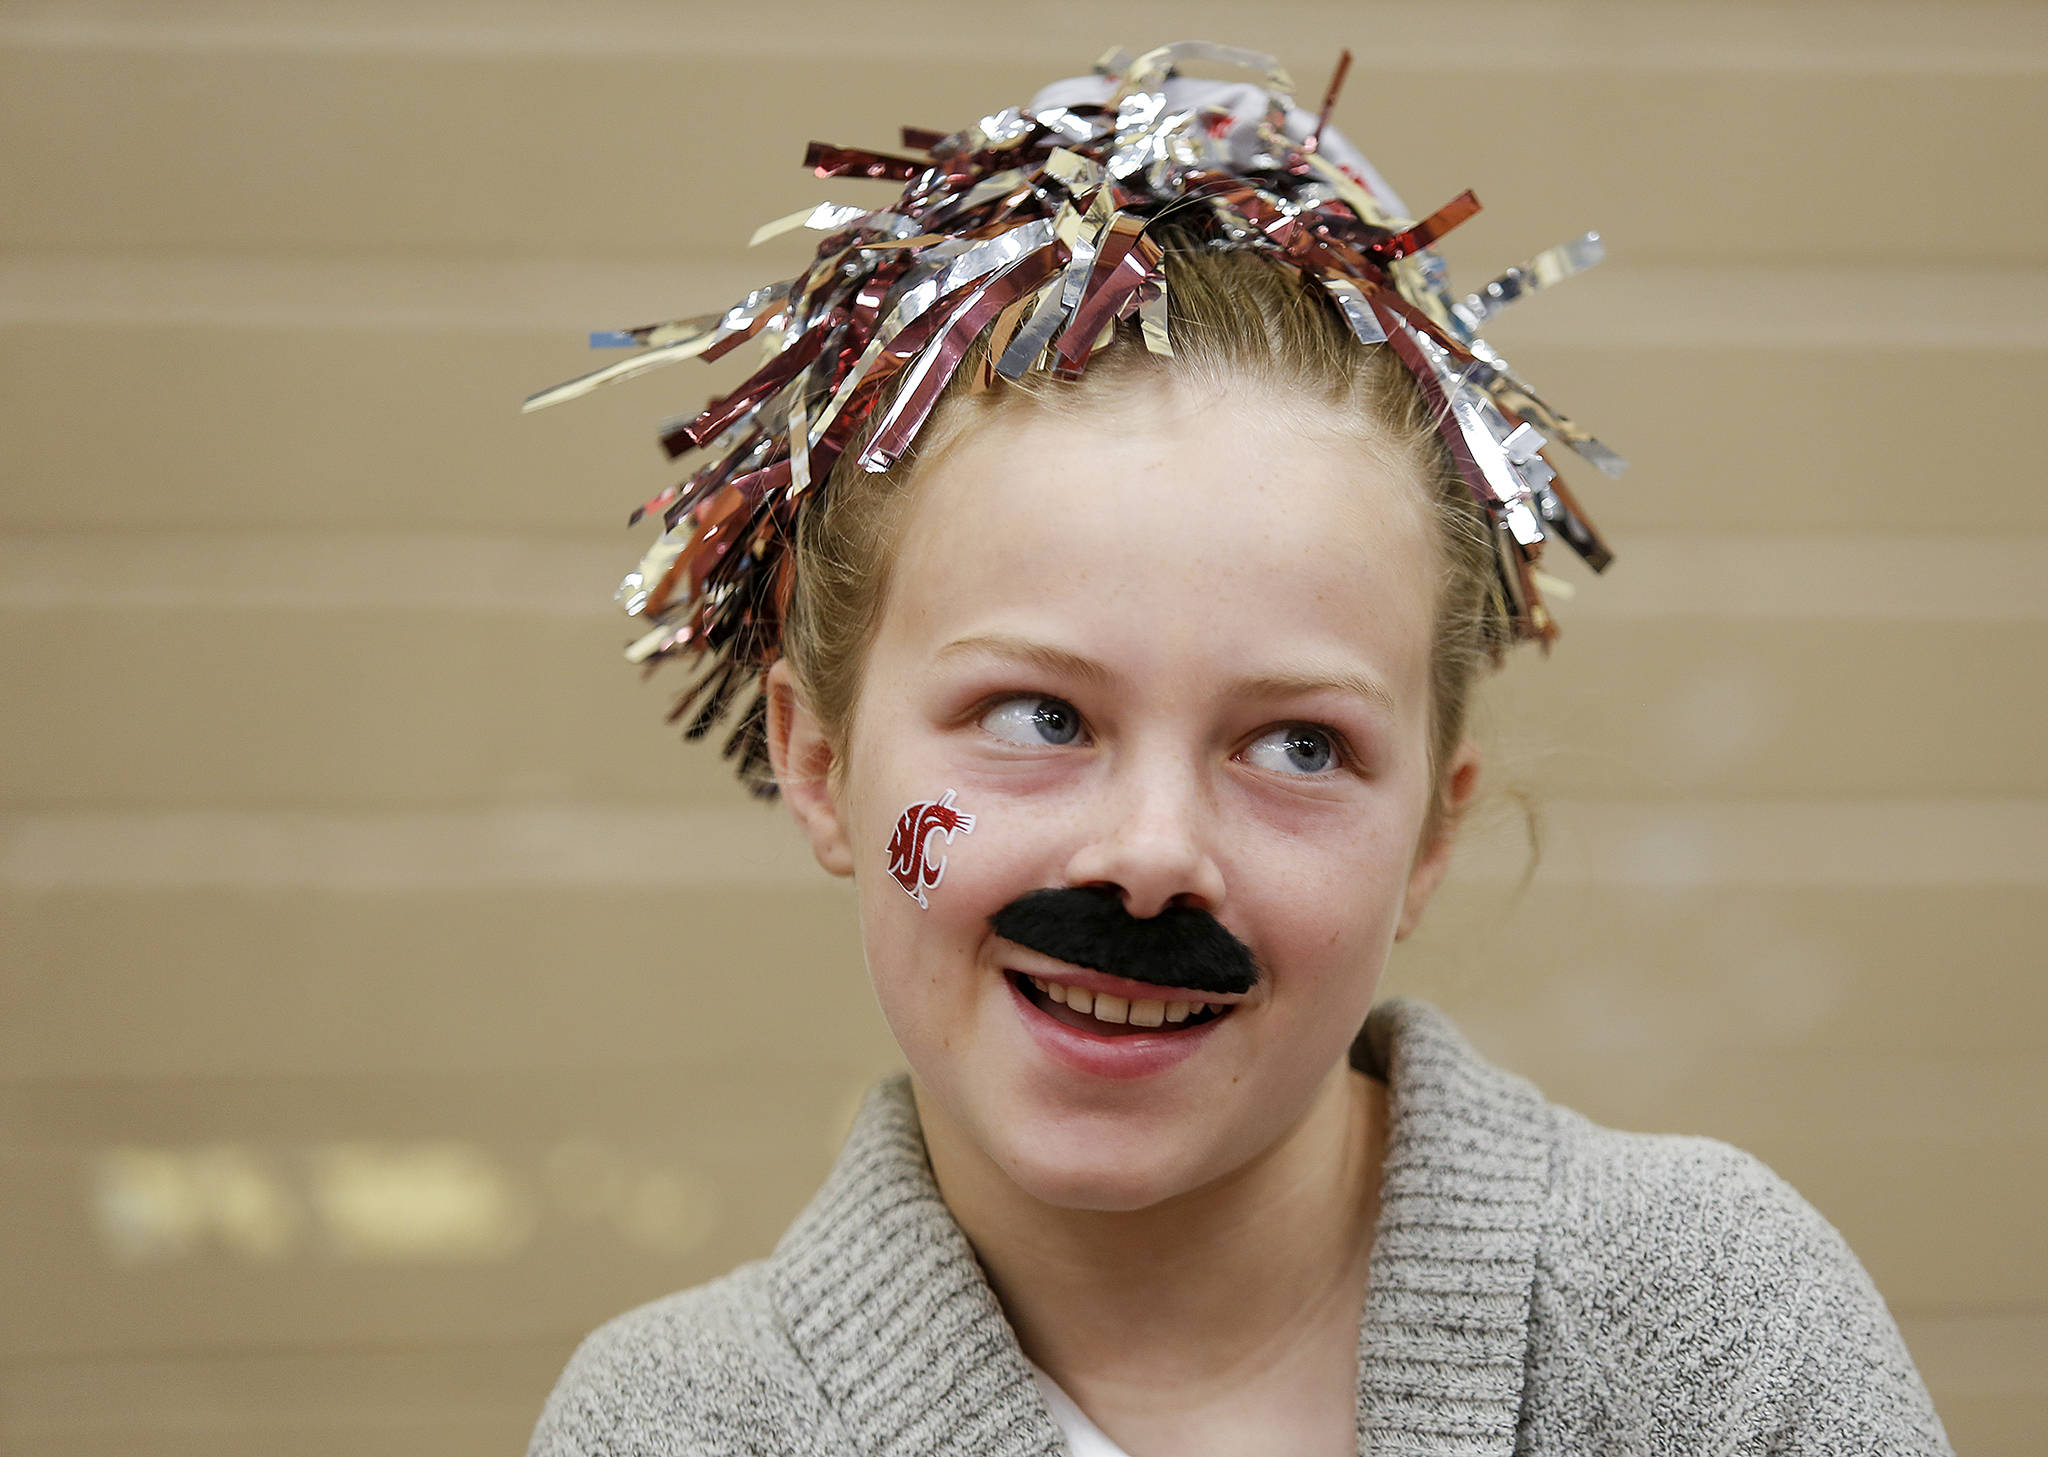 Emma Rice’s mustache shows her support for the Cougars as Dutch Hill Elementary held an &lt;a href="https://www.heraldnet.com/sports/a-side-of-rivalry-with-their-donuts/" target="_blank"&gt;Apple Cup-themed Dads and Donuts&lt;/a&gt; event, with the gym decked out in Cougar and Husky colors, on Nov. 21 in Snohomish. (Andy Bronson / The Herald)